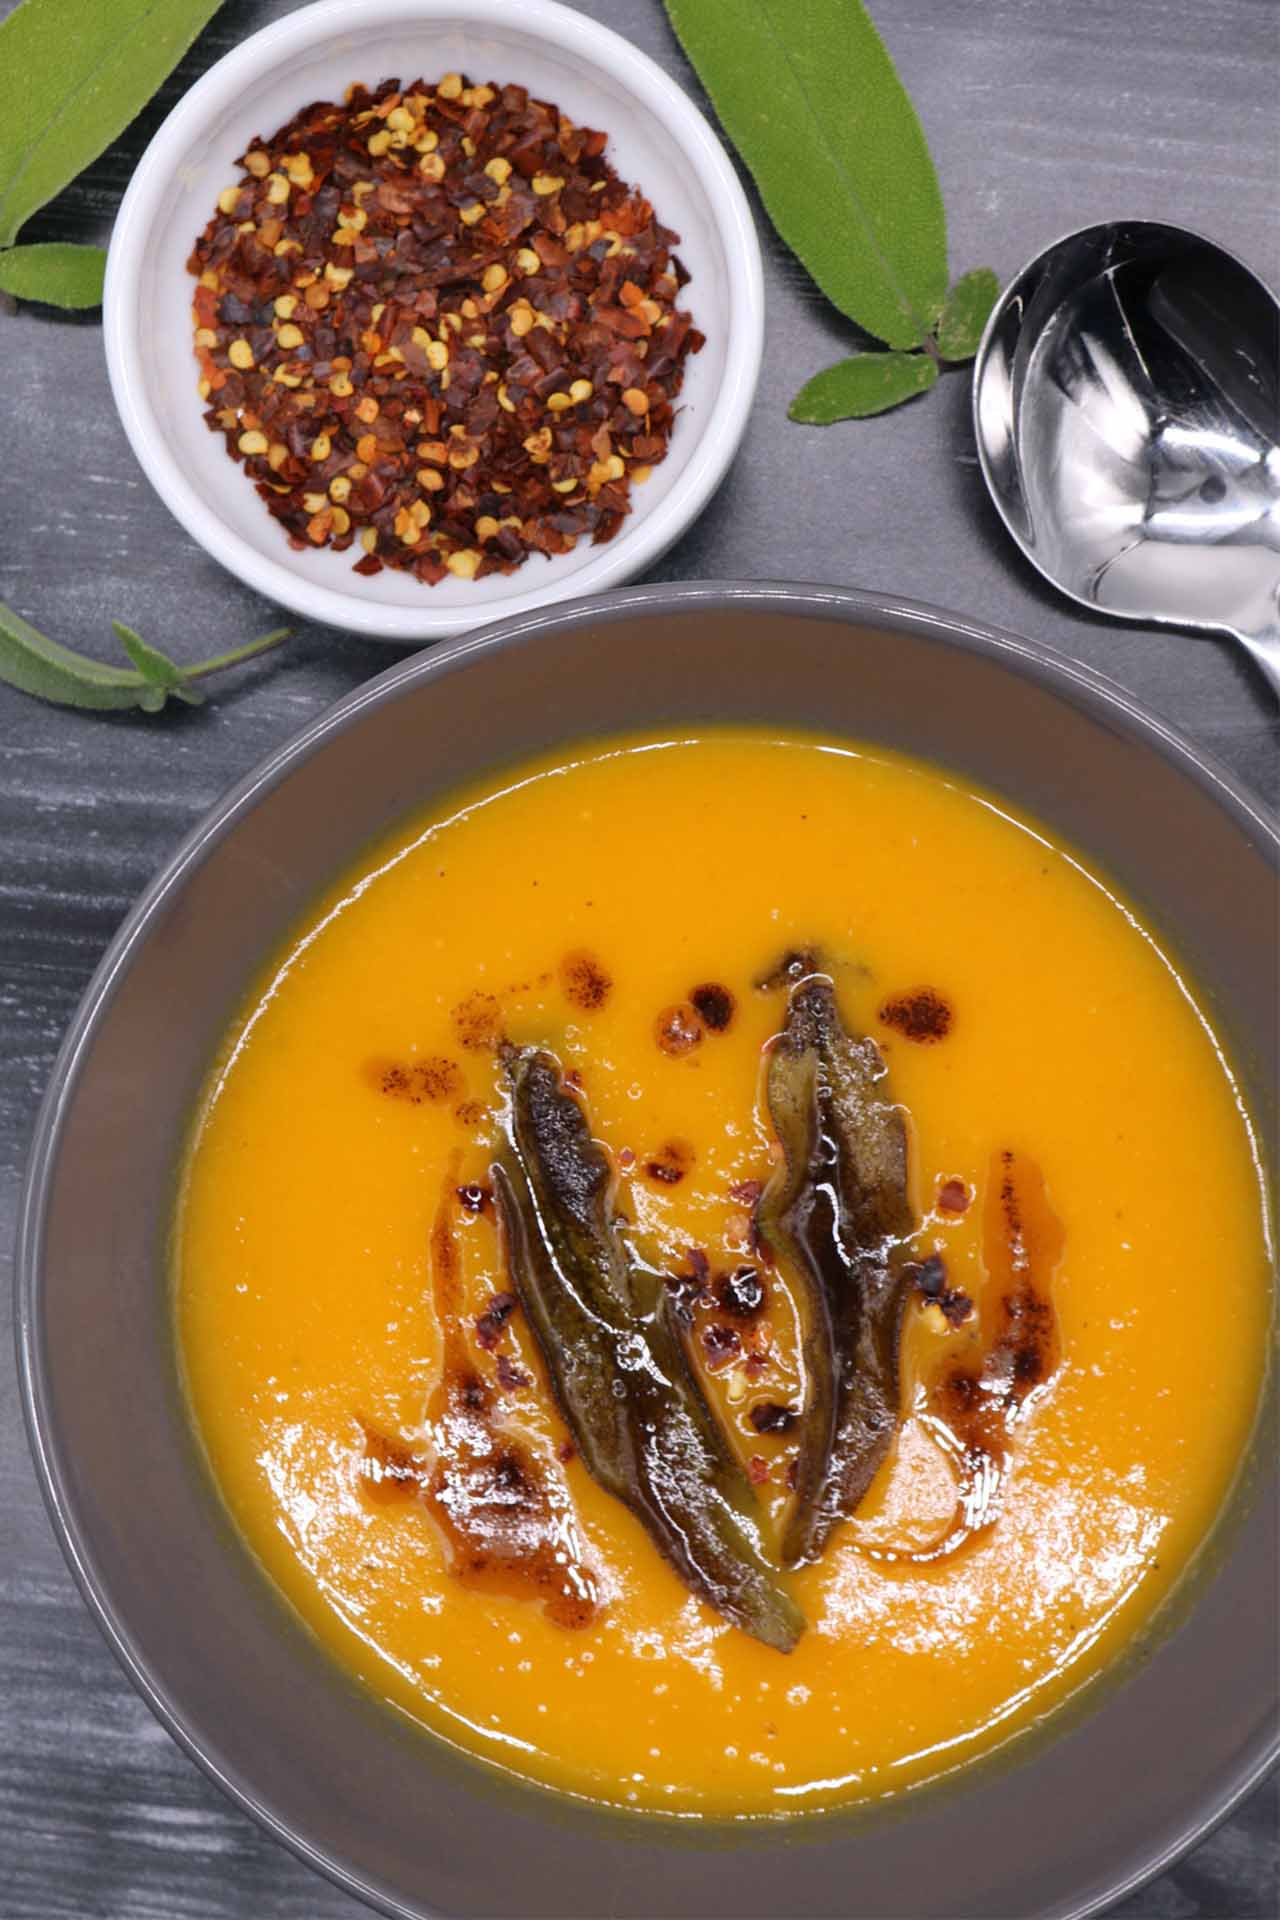 Squash and Carrot Soup with Crispy Sage Leaves